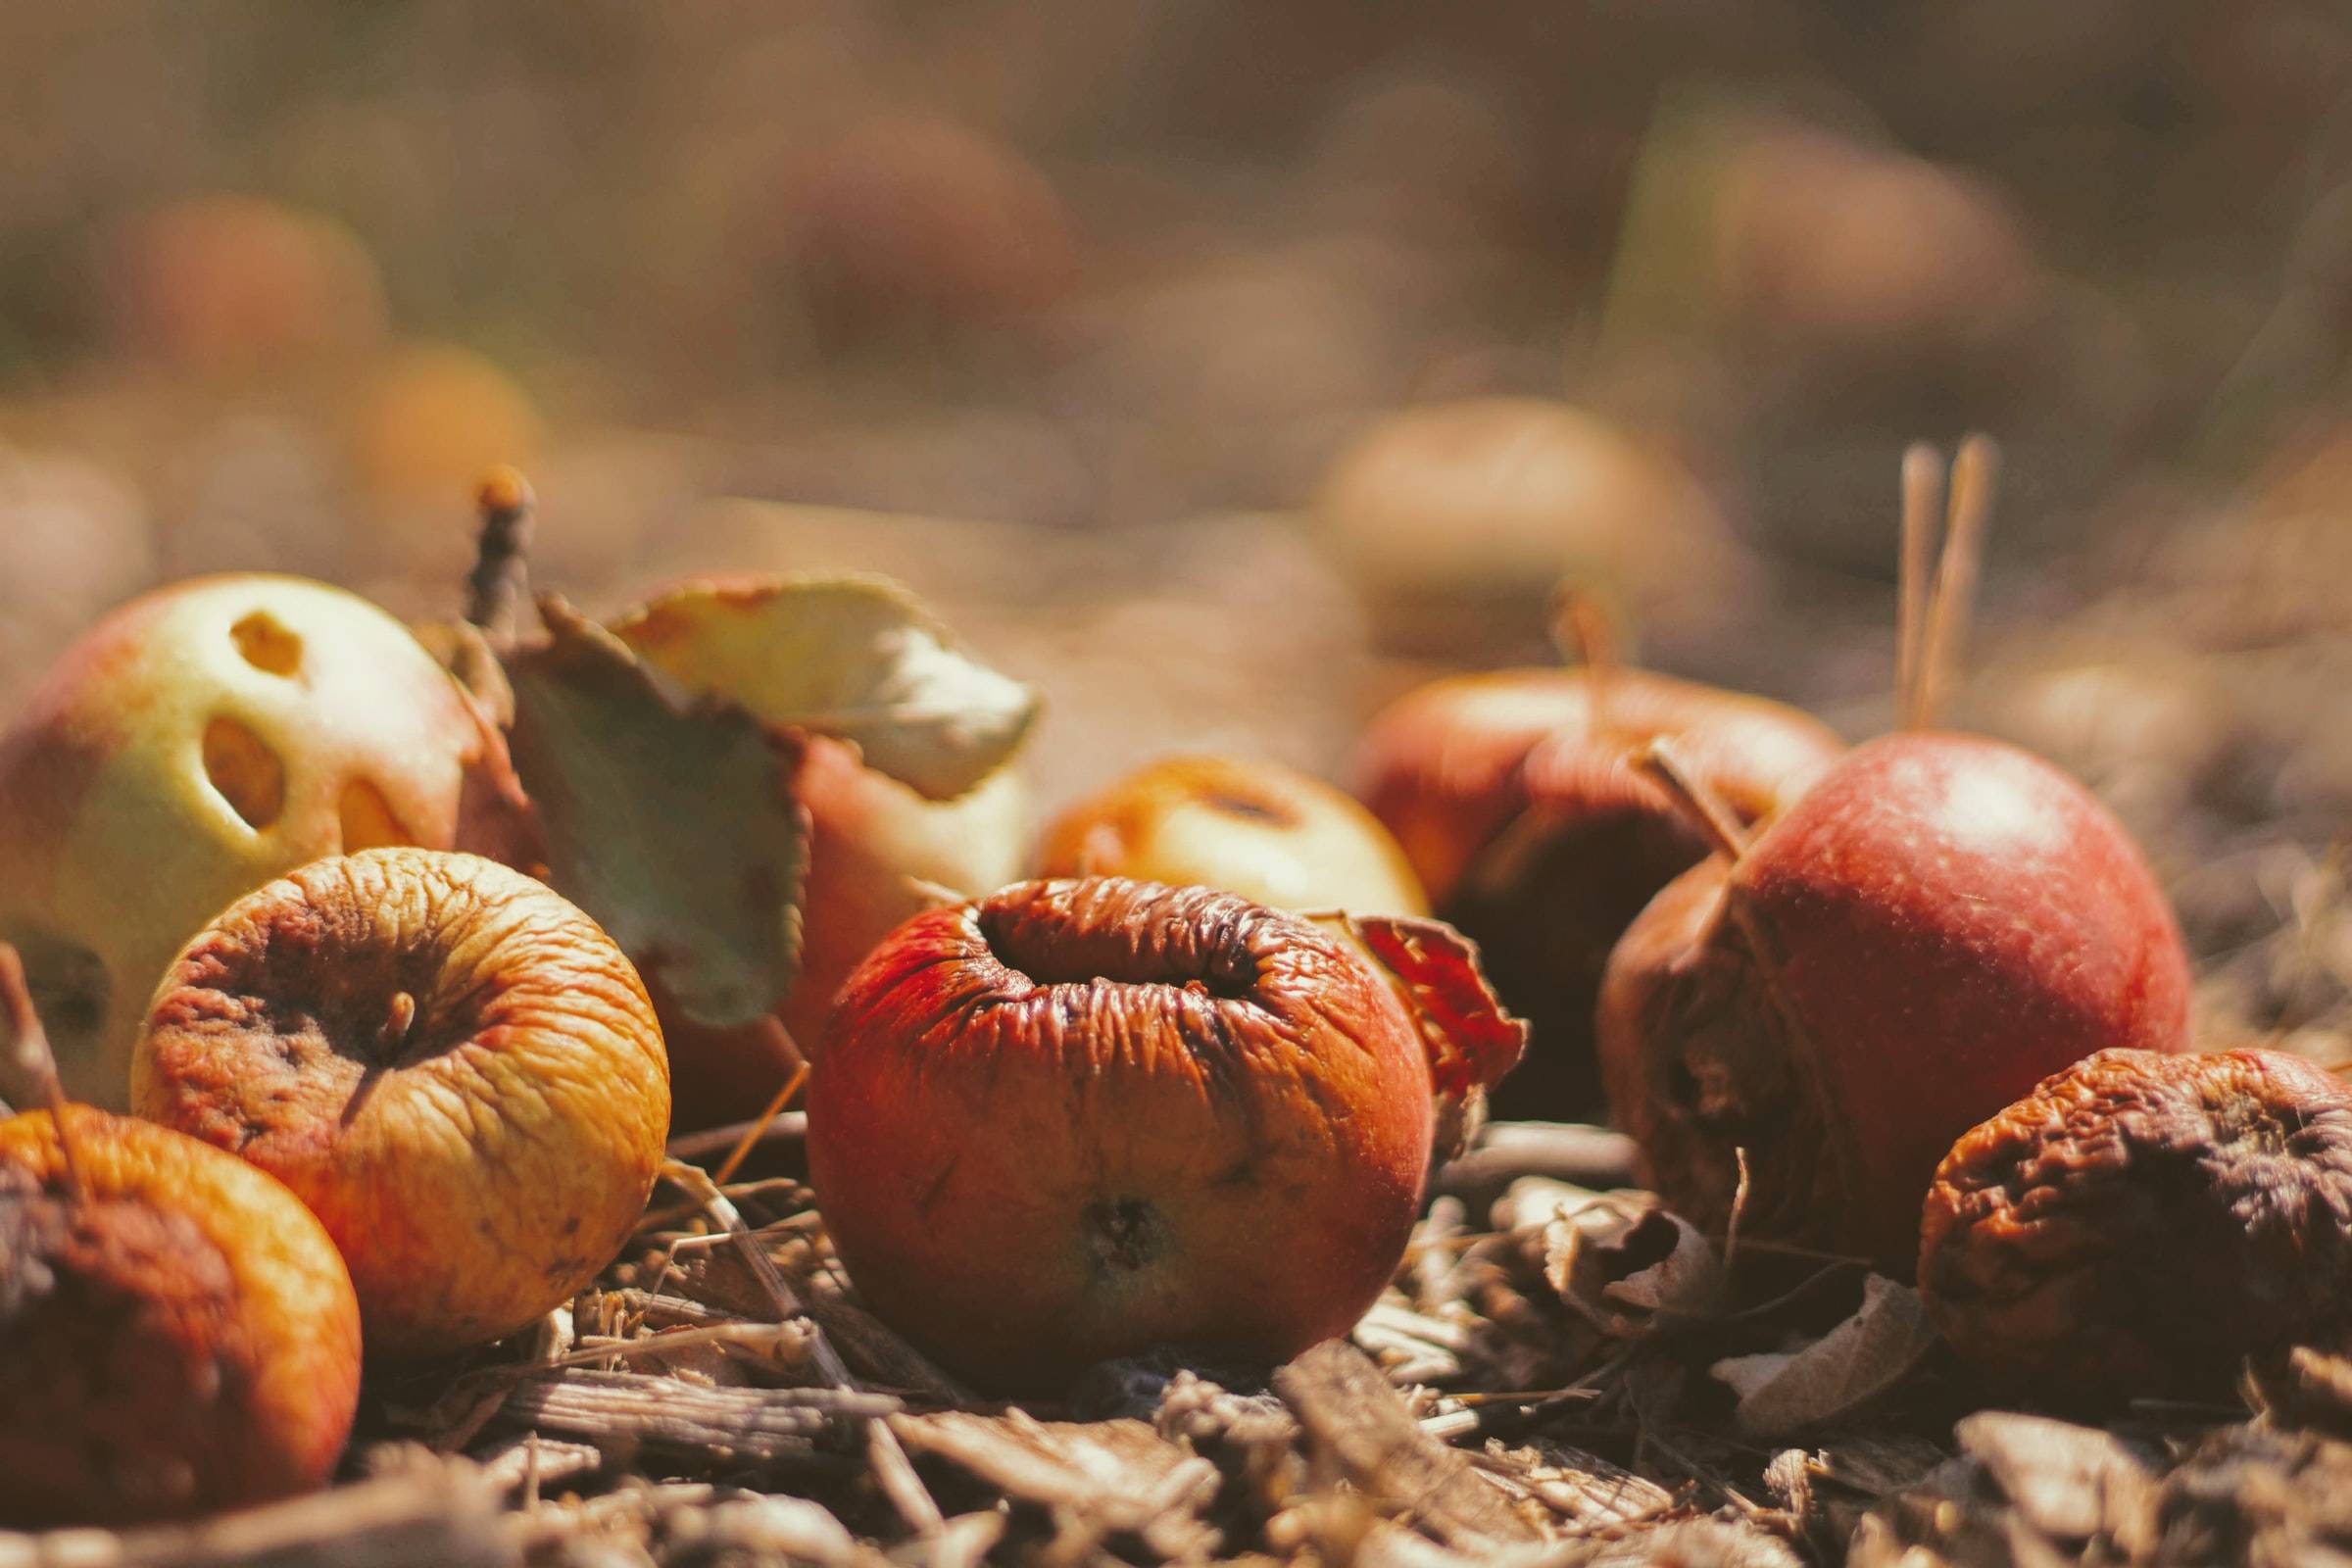 Using natural compounds to fight food waste